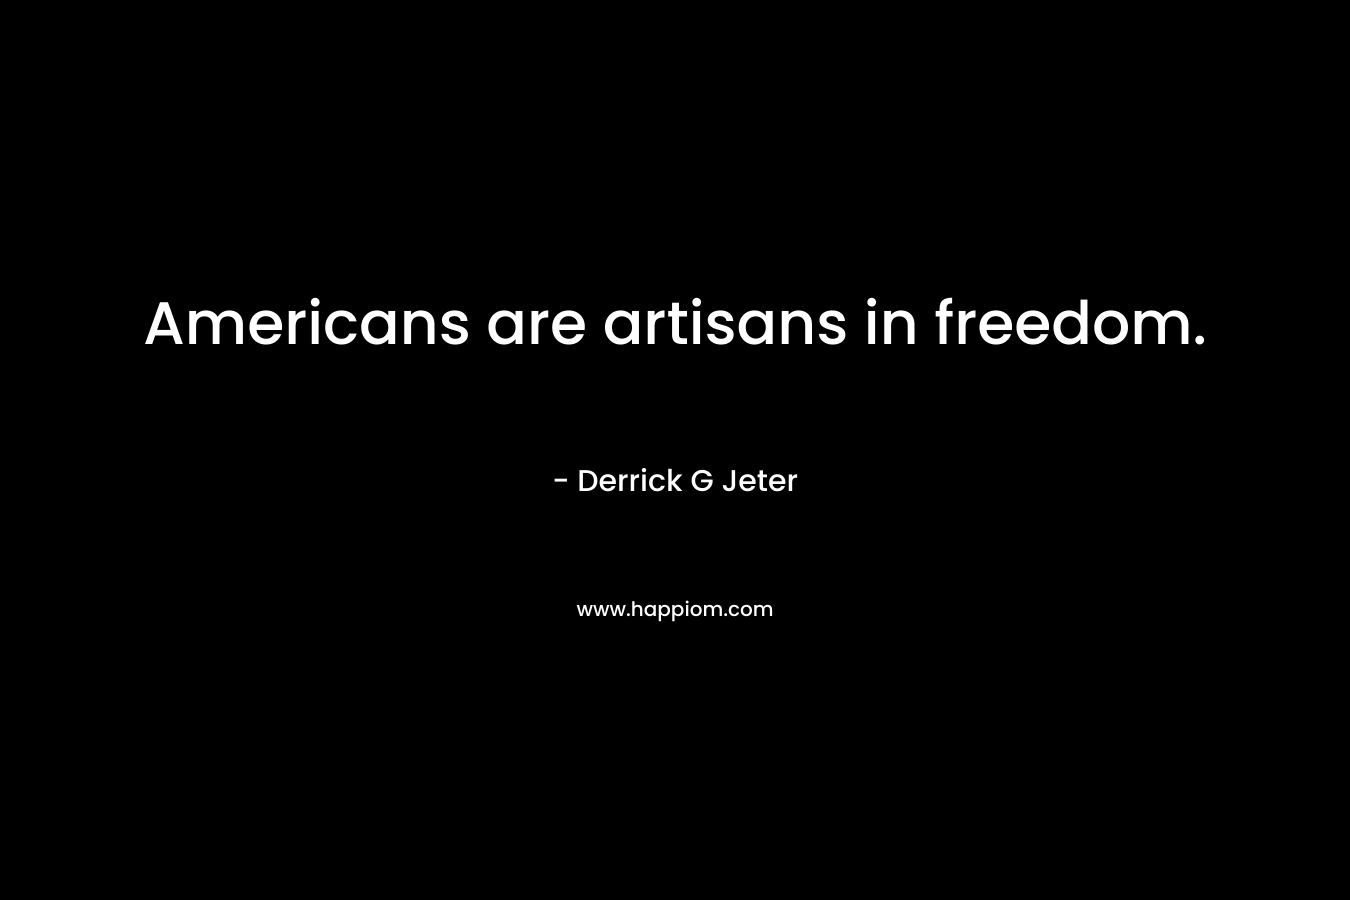 Americans are artisans in freedom. – Derrick G Jeter